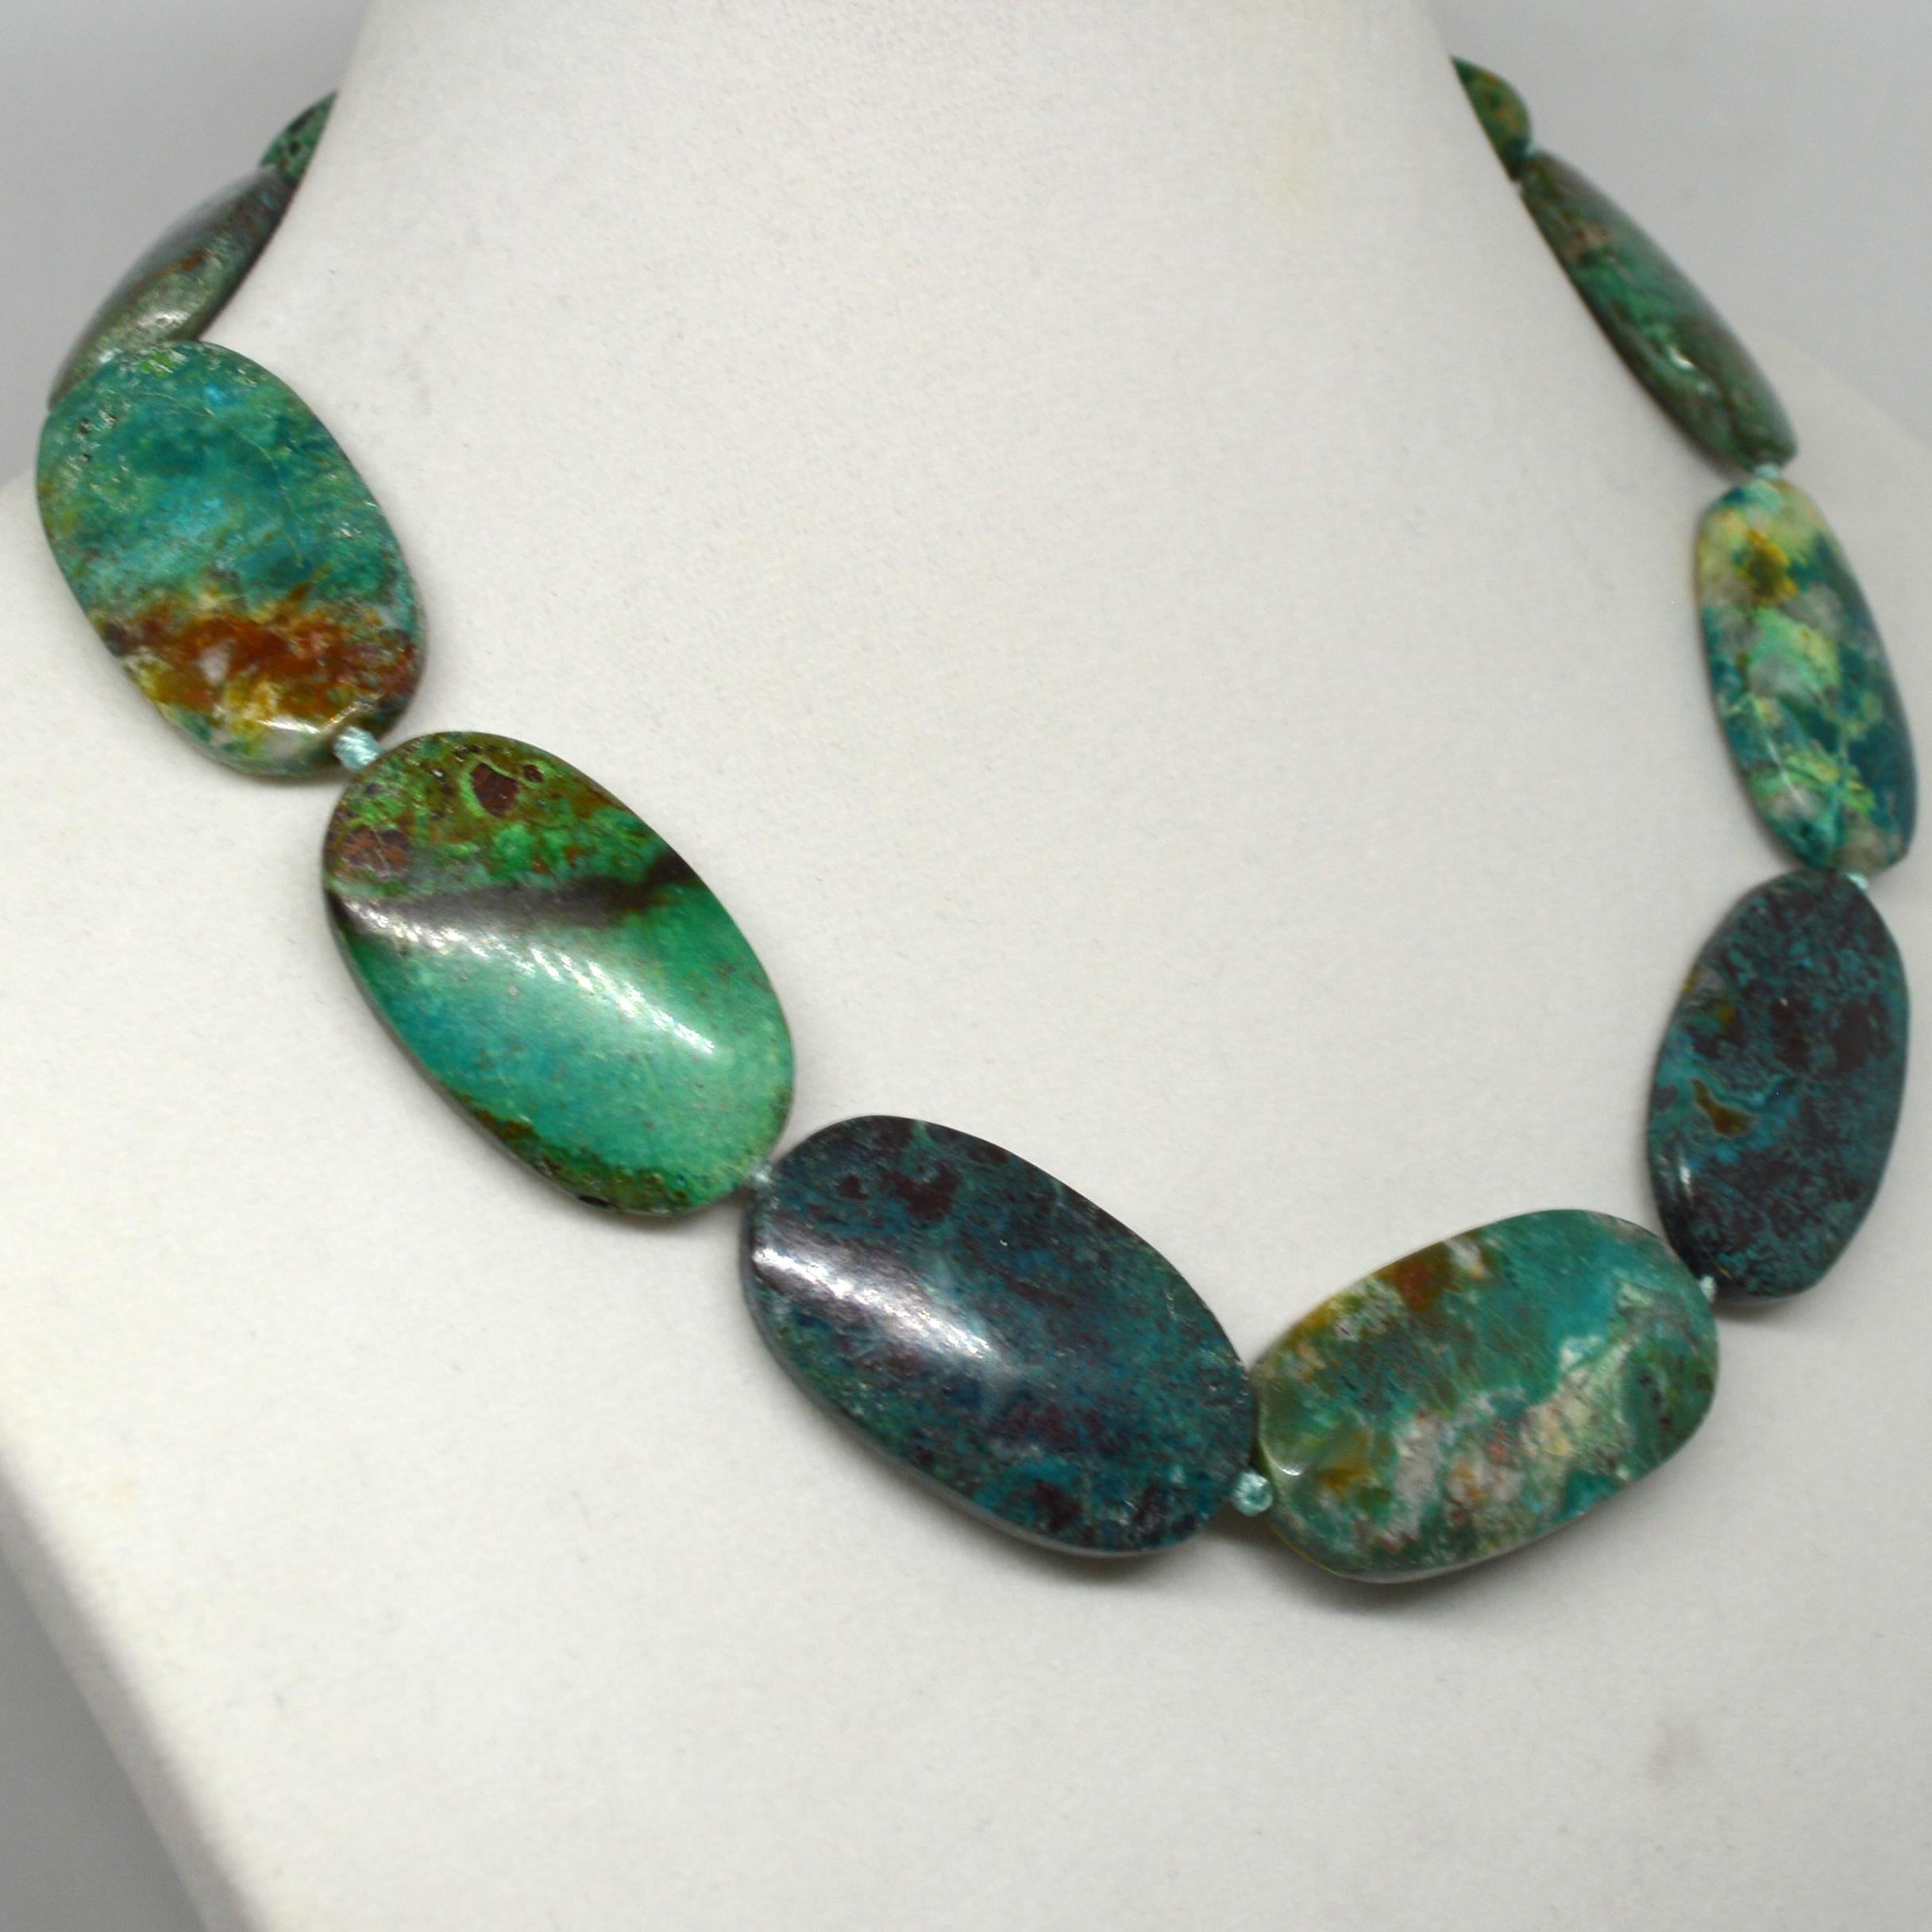 Large flat oval Chrysocolla beads ranging in size from 37x22.8 to 44.4x22.6mm for the longest bead finished with an elegant 55mm Sterling Silver hook clasp.
Finished necklace measures 46cm